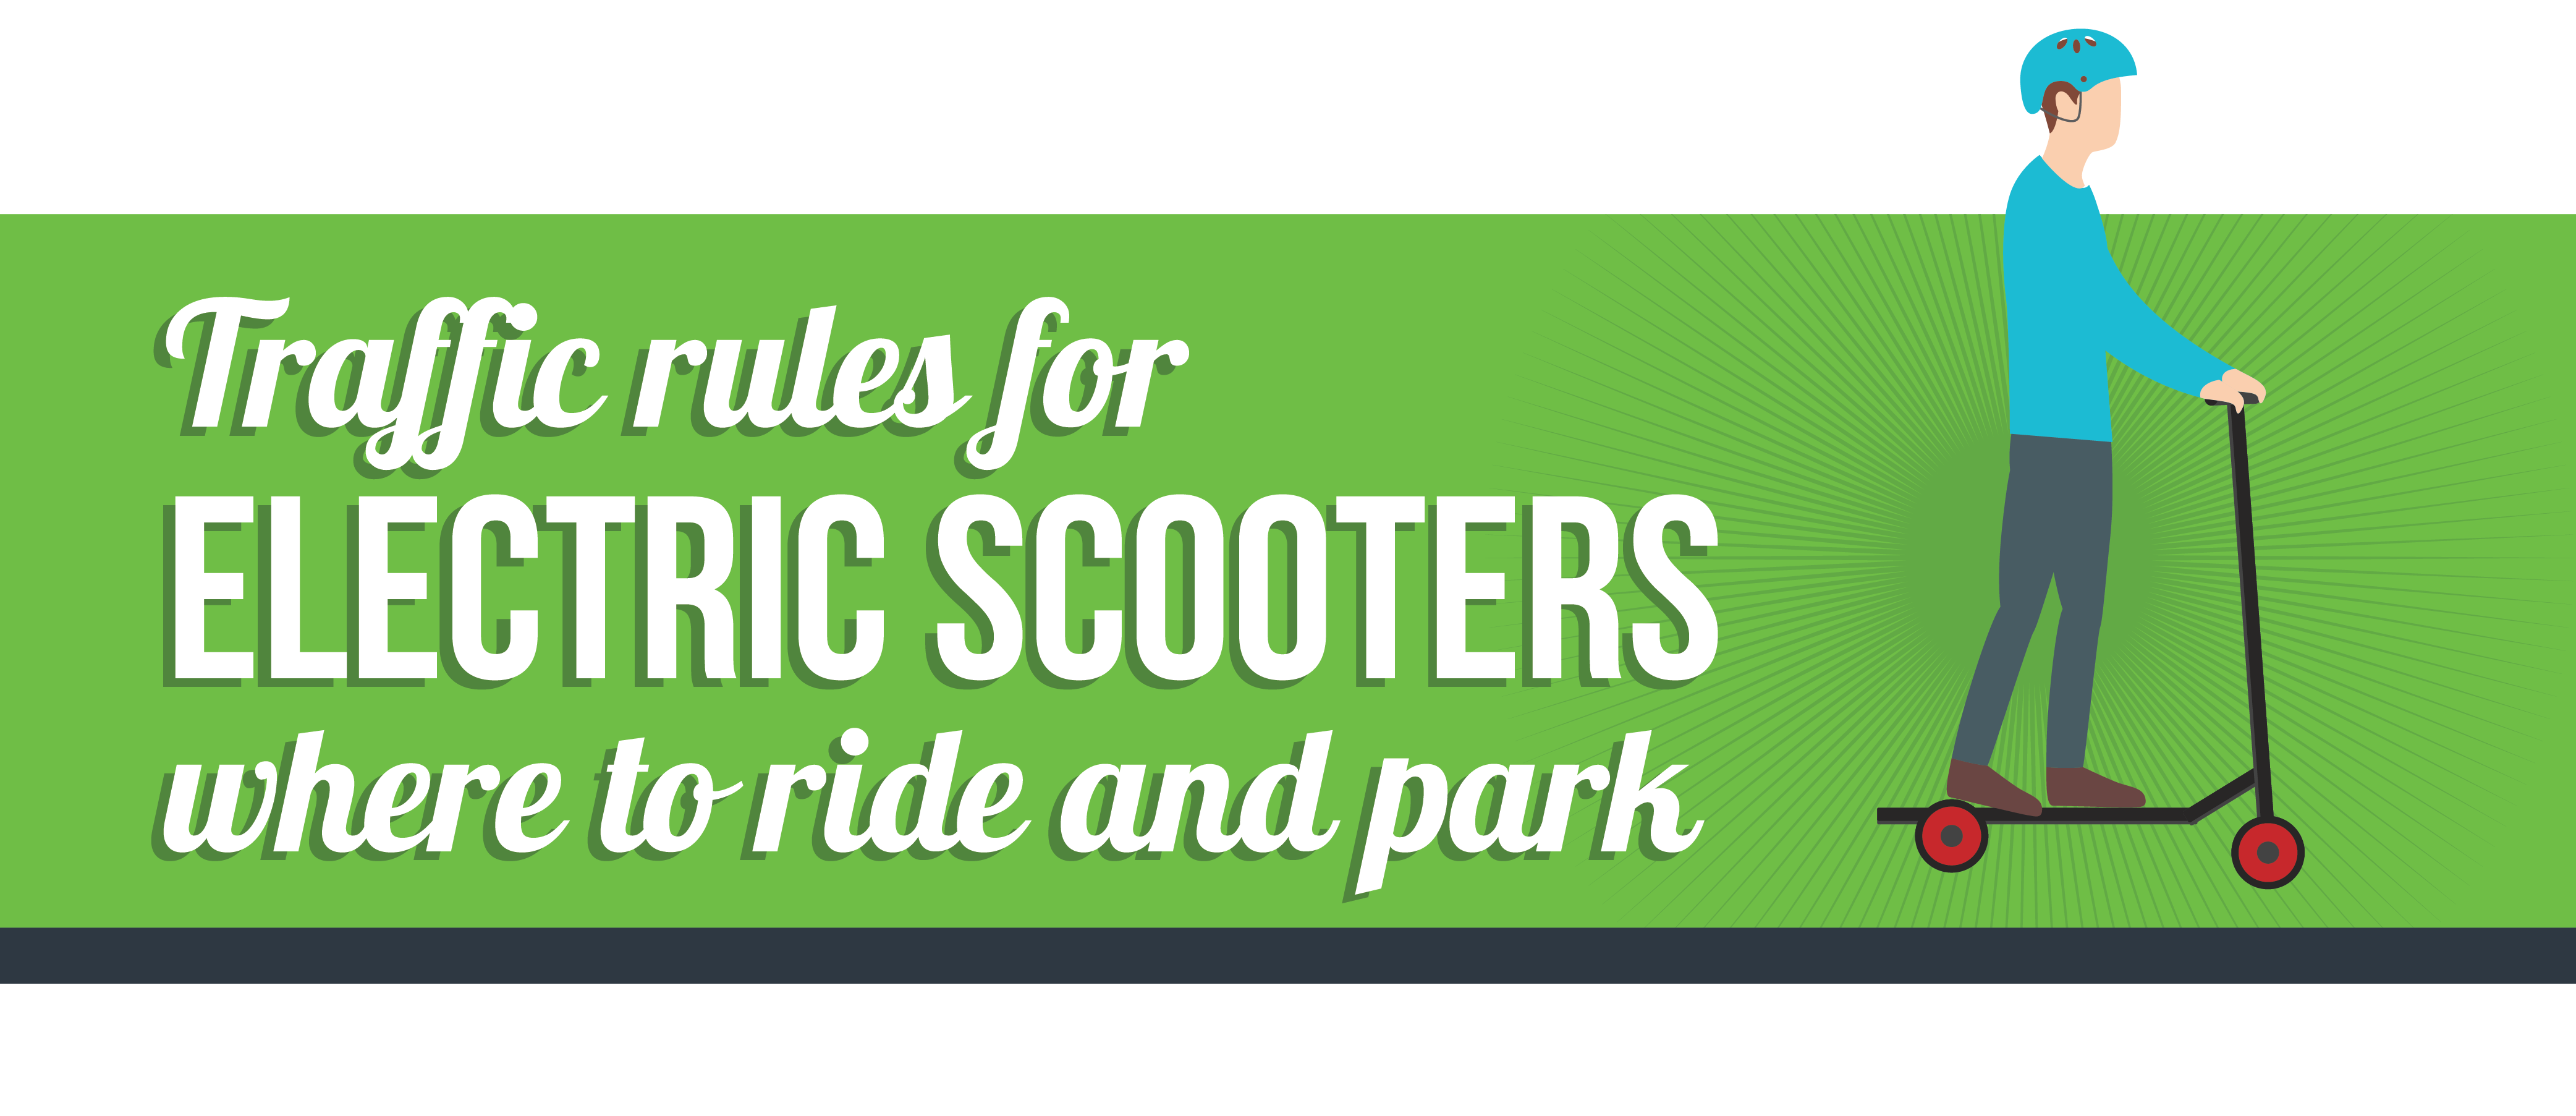 Traffic rules for electric scooters - Where are you allowed to ride and park